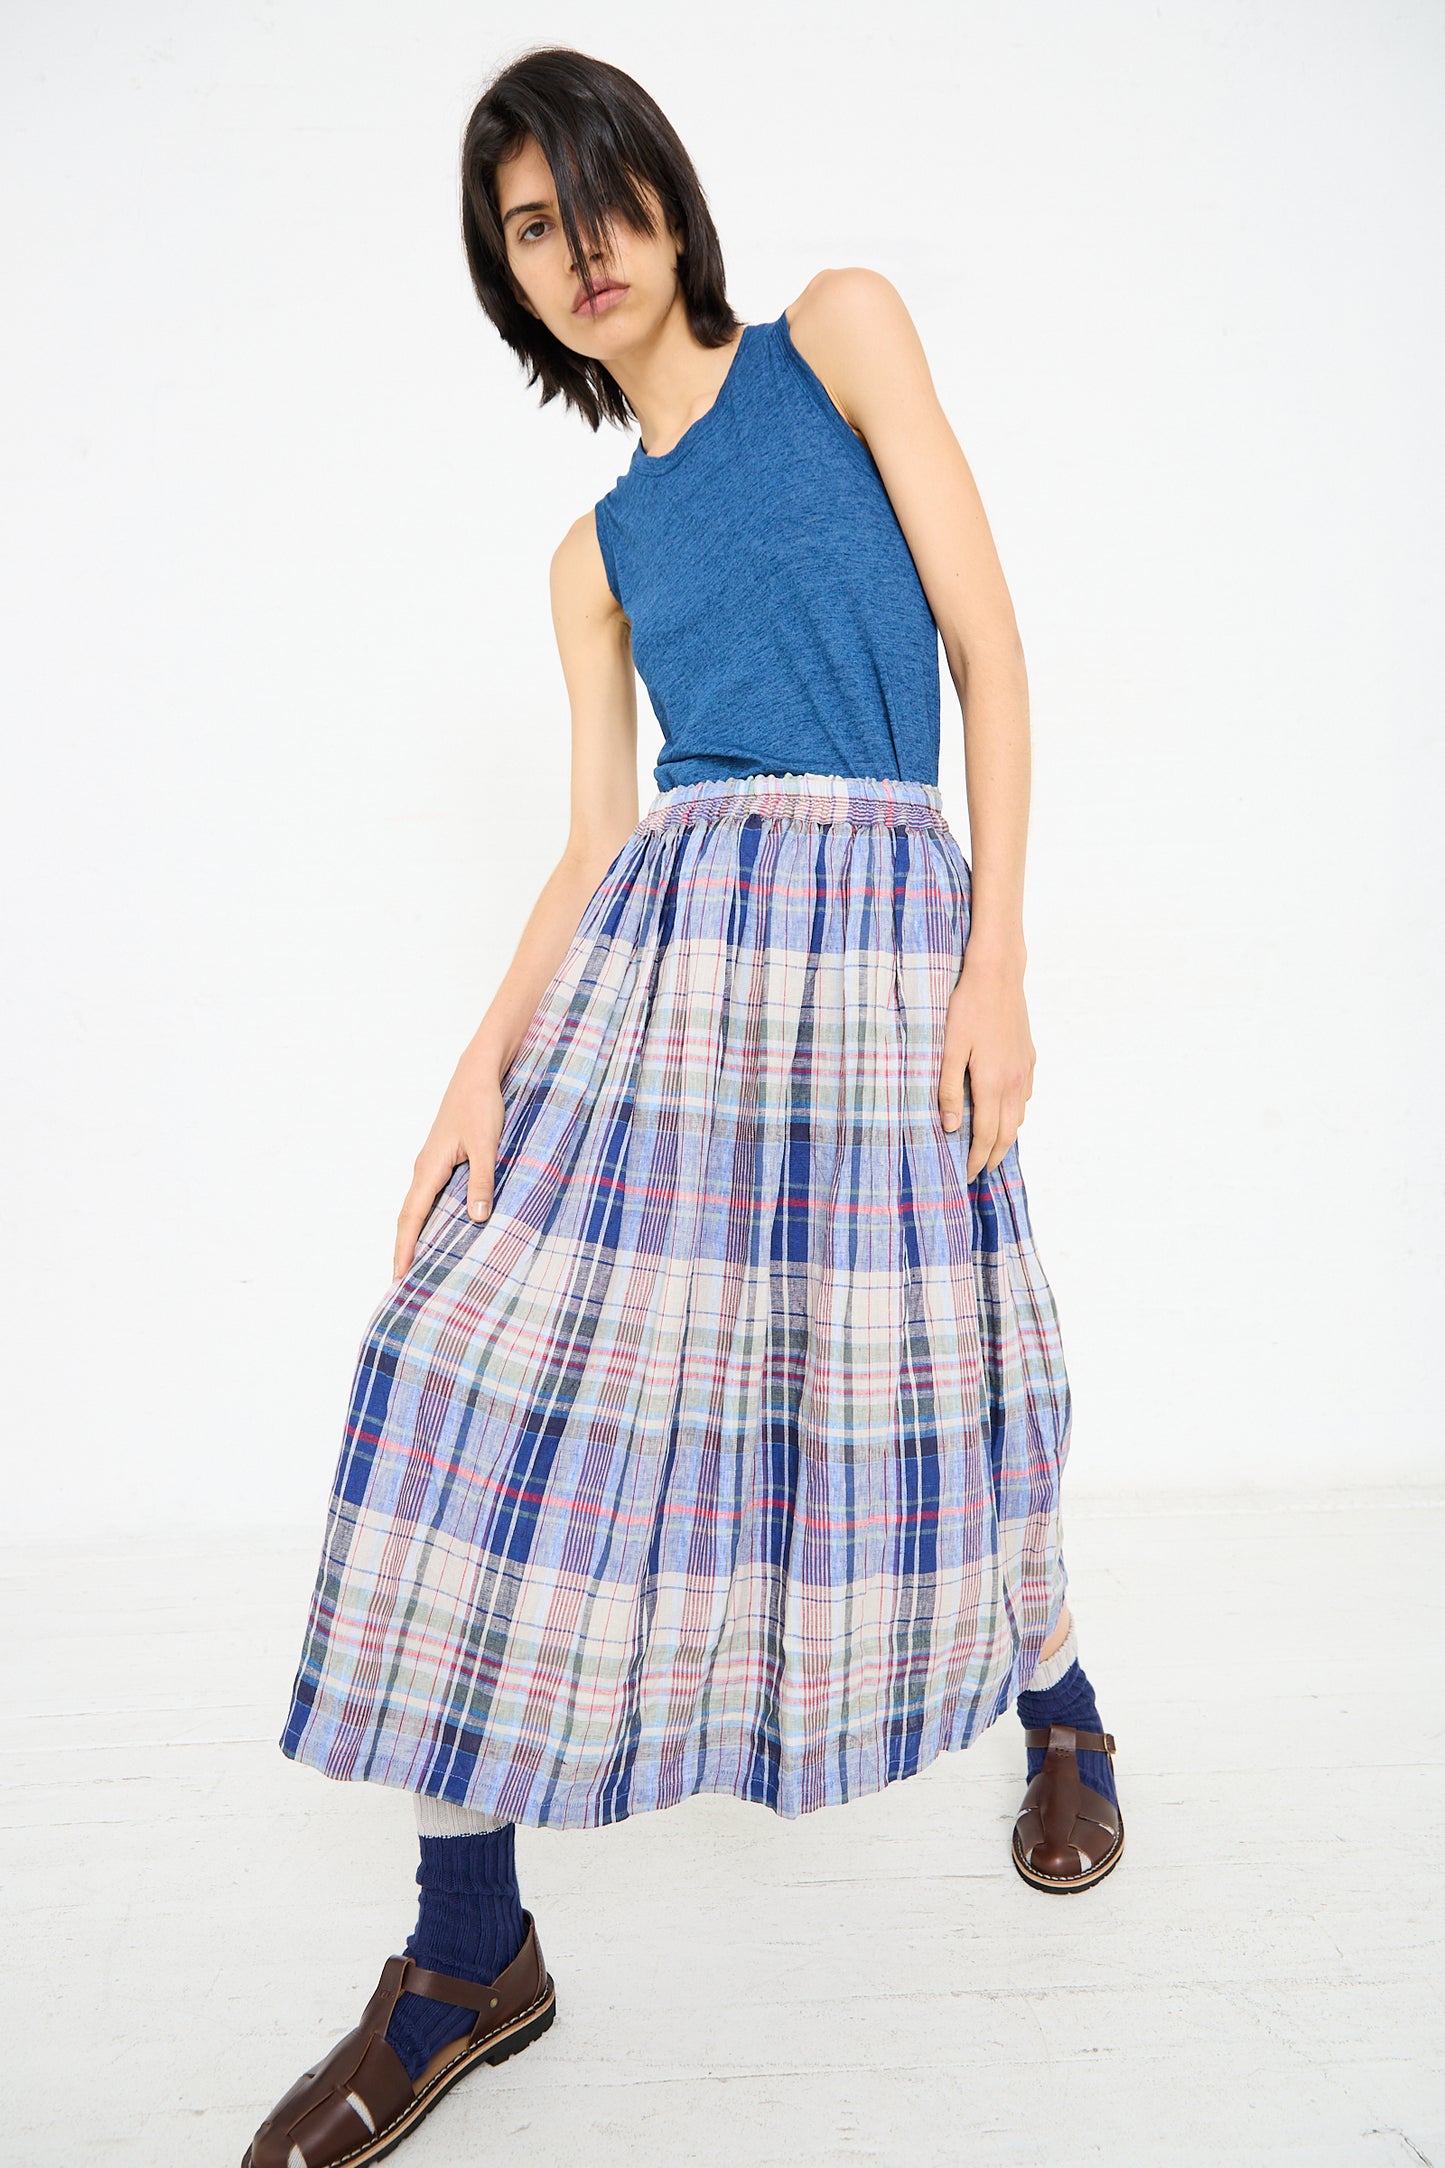 A person with short dark hair wears a blue sleeveless top, a Linen Check Skirt in Navy by Ichi Antiquités, blue socks, and brown sandals, posing against a plain white background.